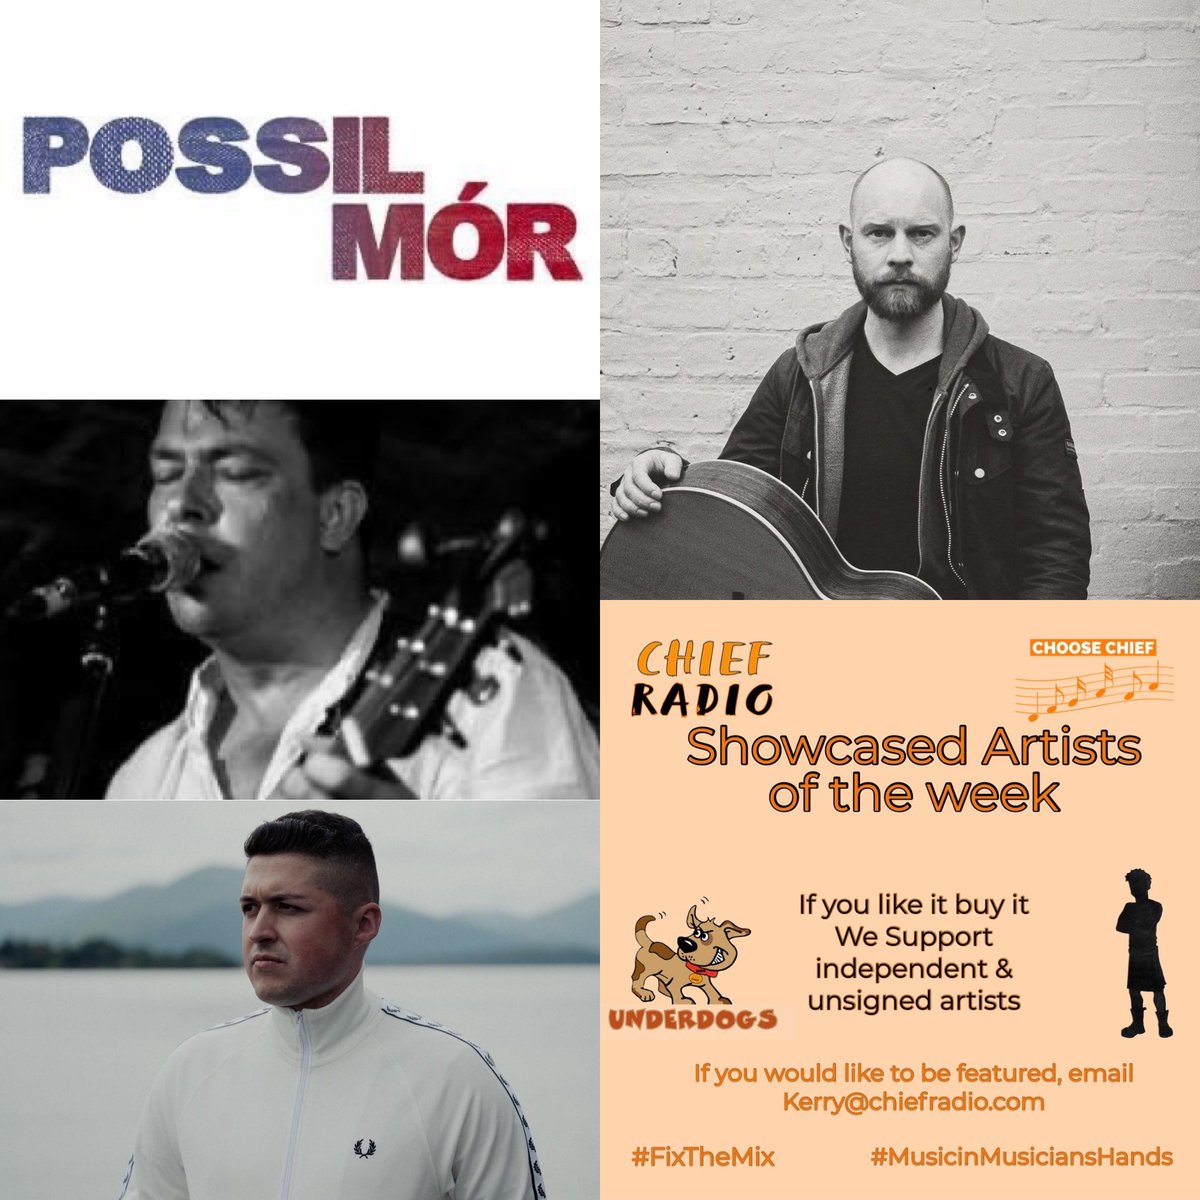 RT @GForce3203: RT @Chiefradio1: Our #unsignedartist this week

@PossilMor 
@SeanLGray 
@Armsongs 
The Fake Shakes

You’ll hear them all week

If you’d like airplay, drop your MP3 to kerry@chiefradio.com

#choosechief #newmusic #ifyoulikeitbuyit